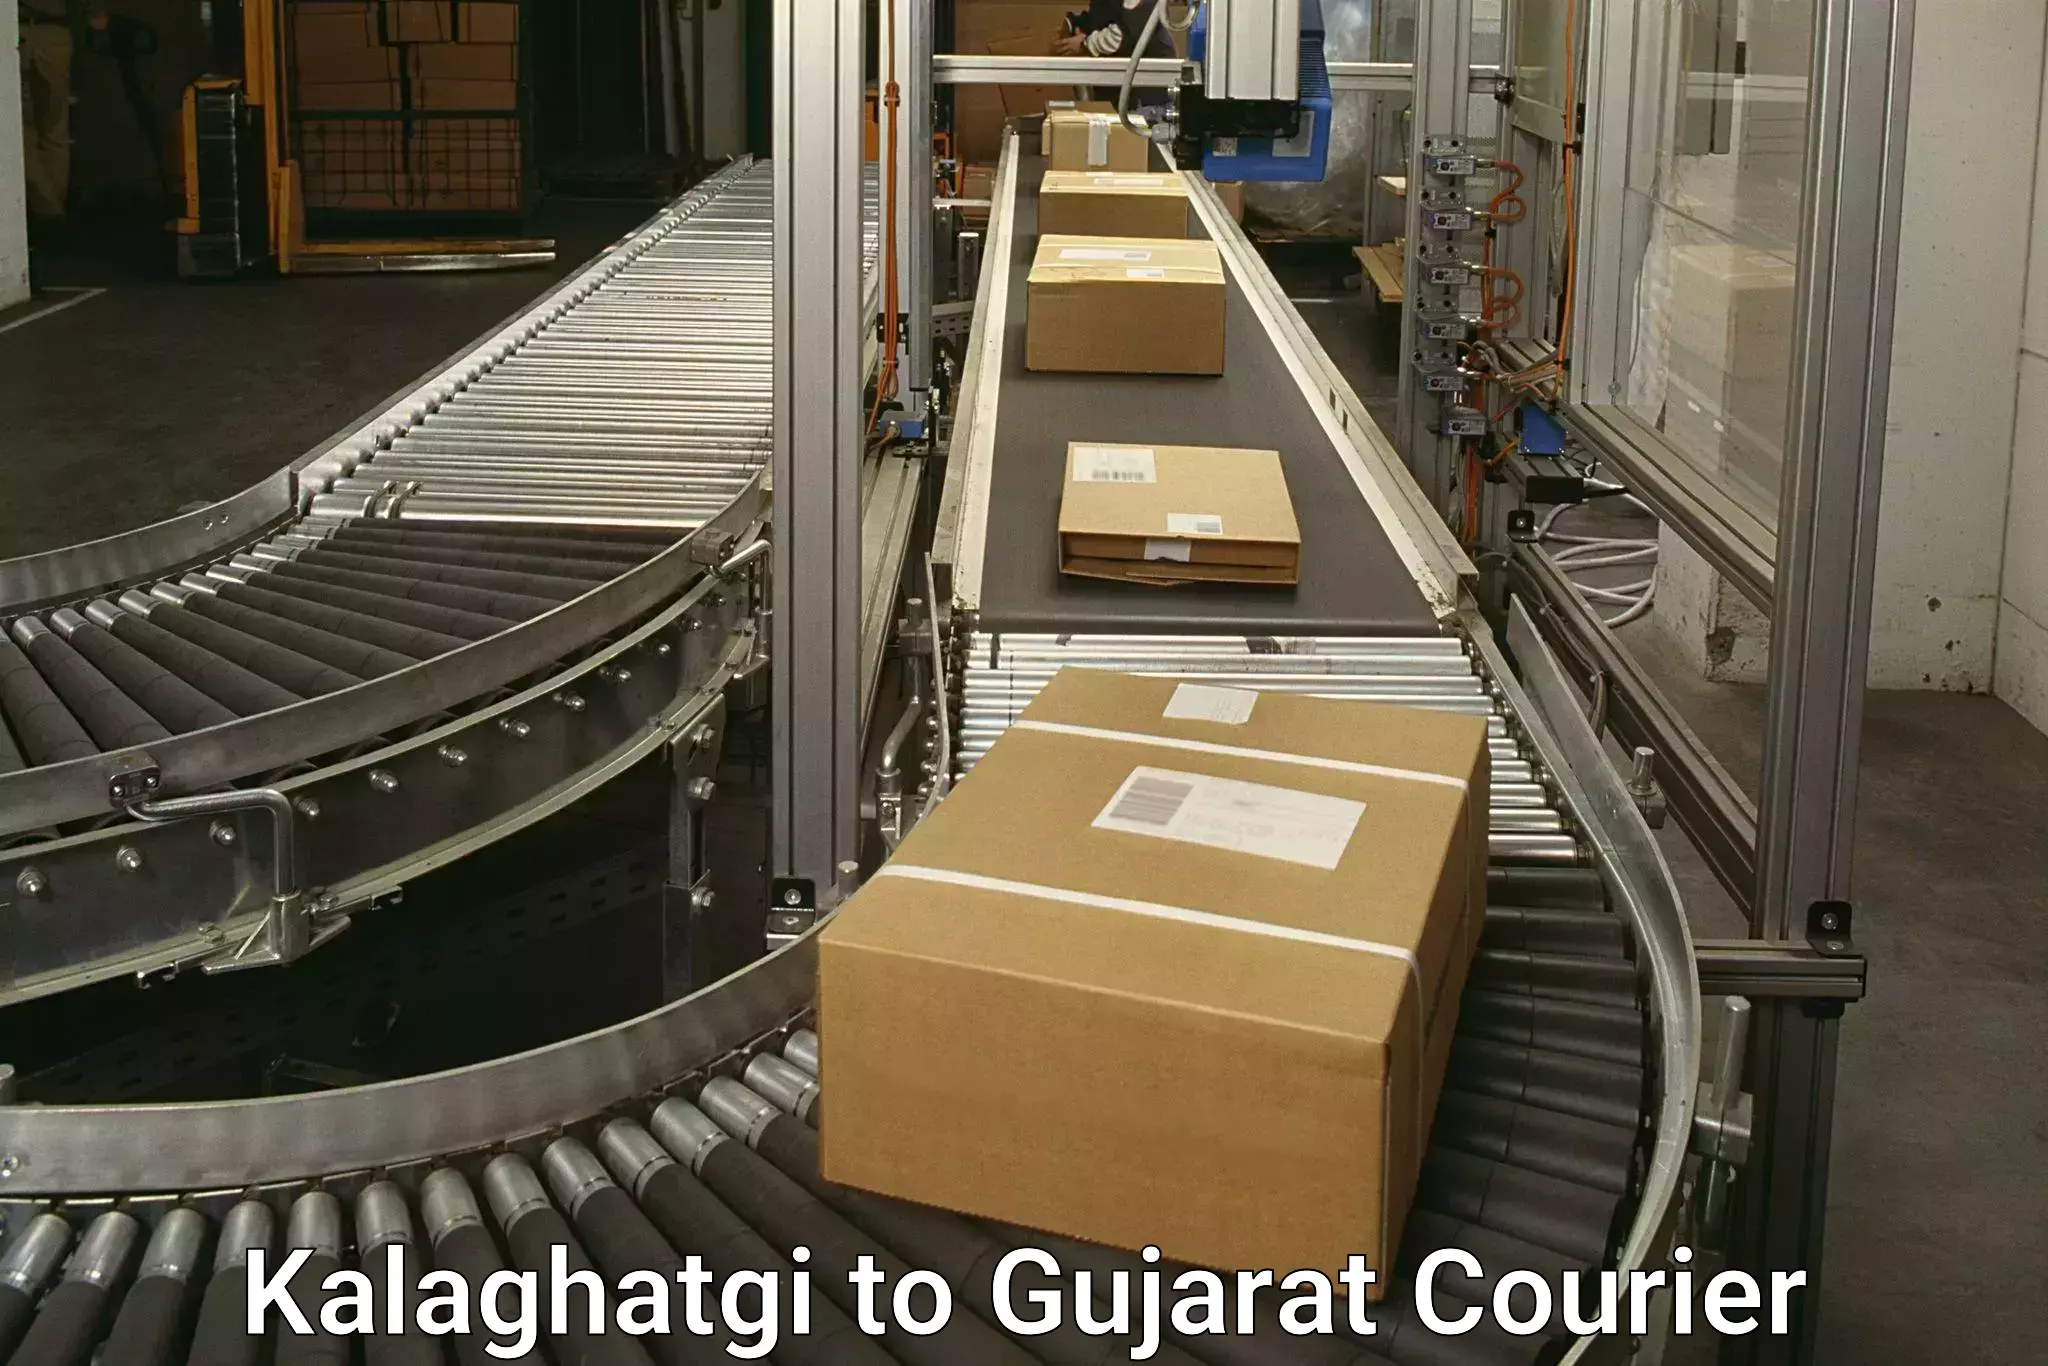 Courier service booking in Kalaghatgi to Bharuch